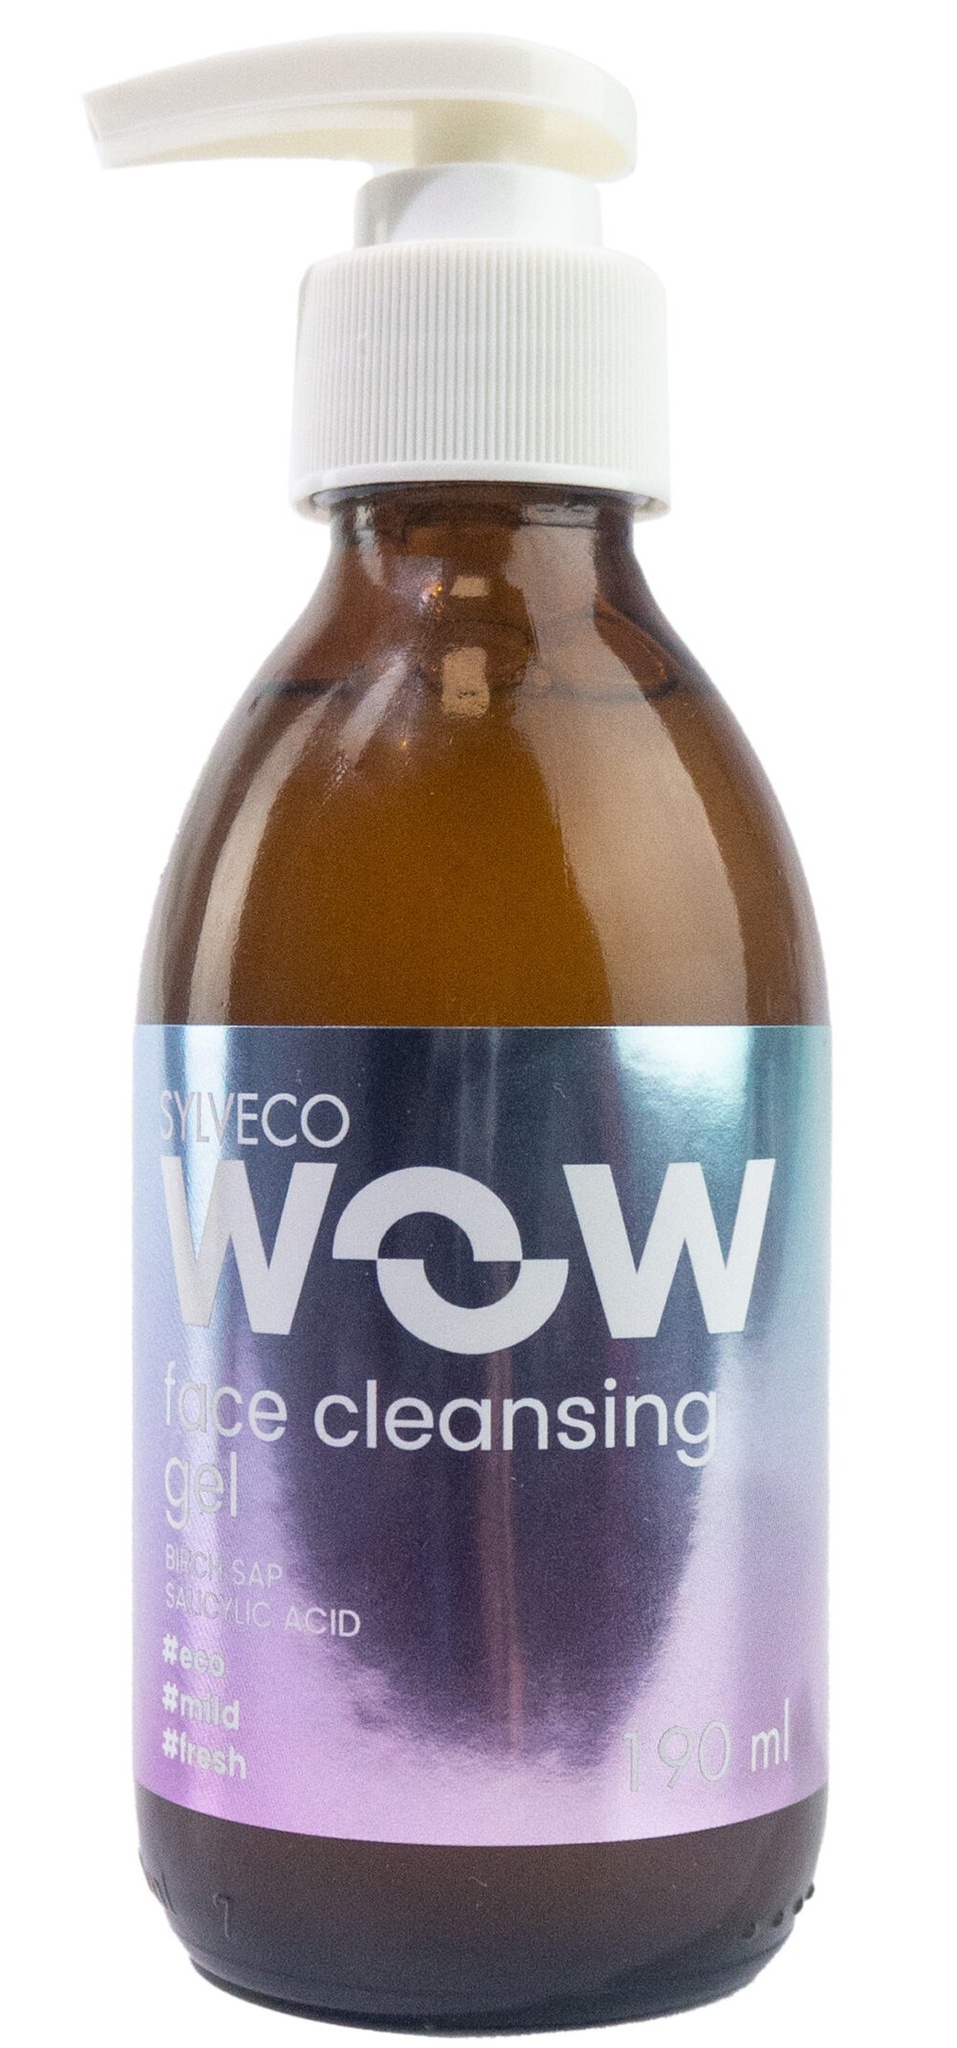 Sylveco Wow Face Cleansing Gel